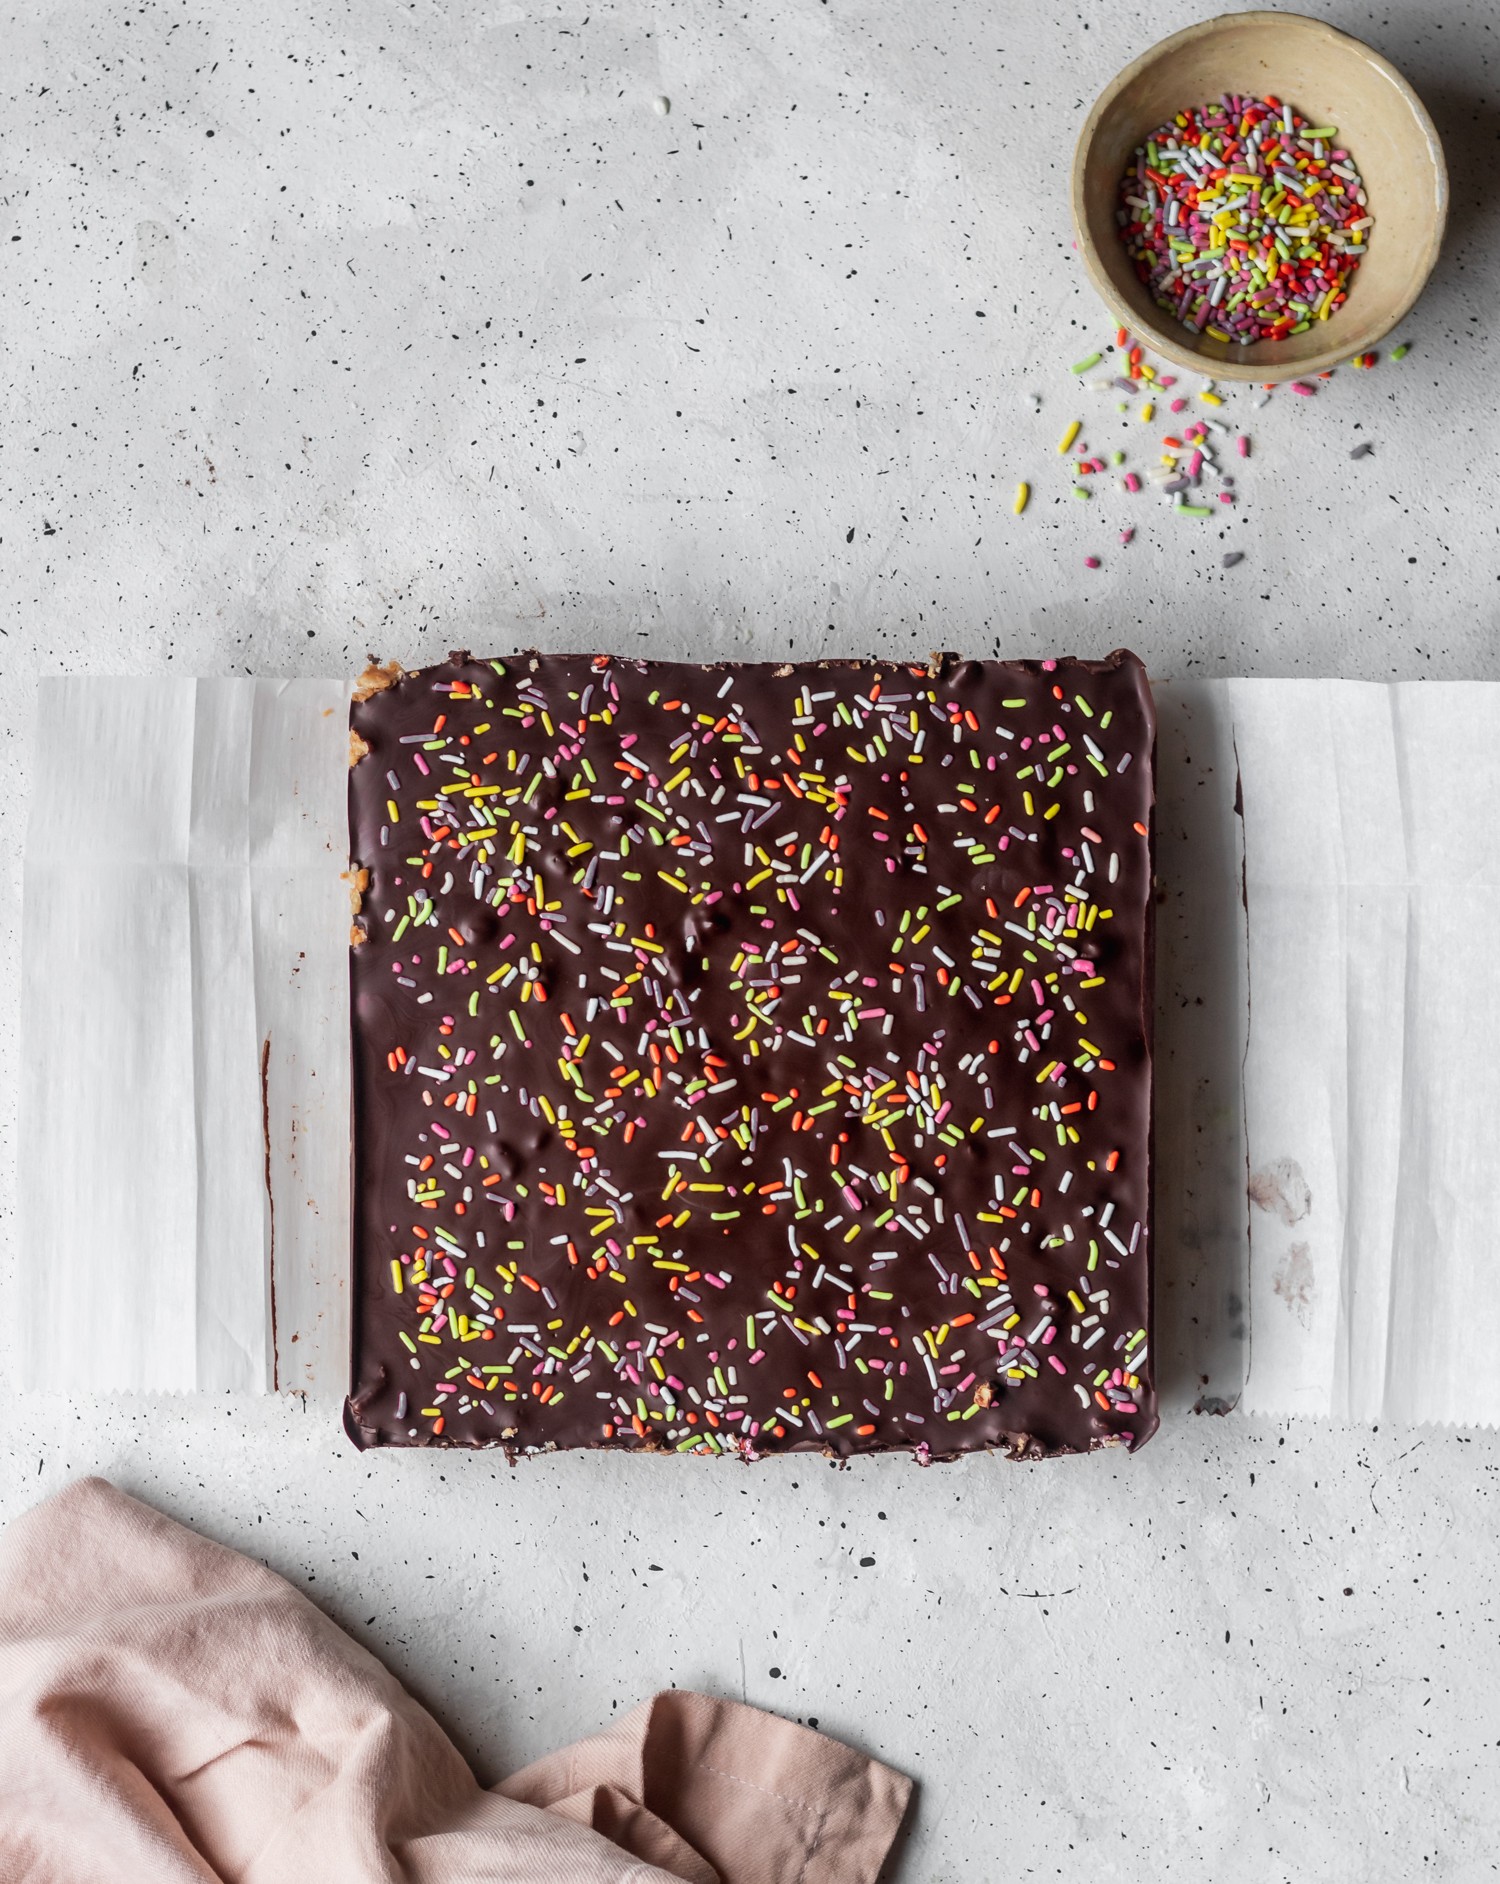 Peanut Butter Chocolate Bars with Rainbow Sprinkles placed on a white, speckled surface.